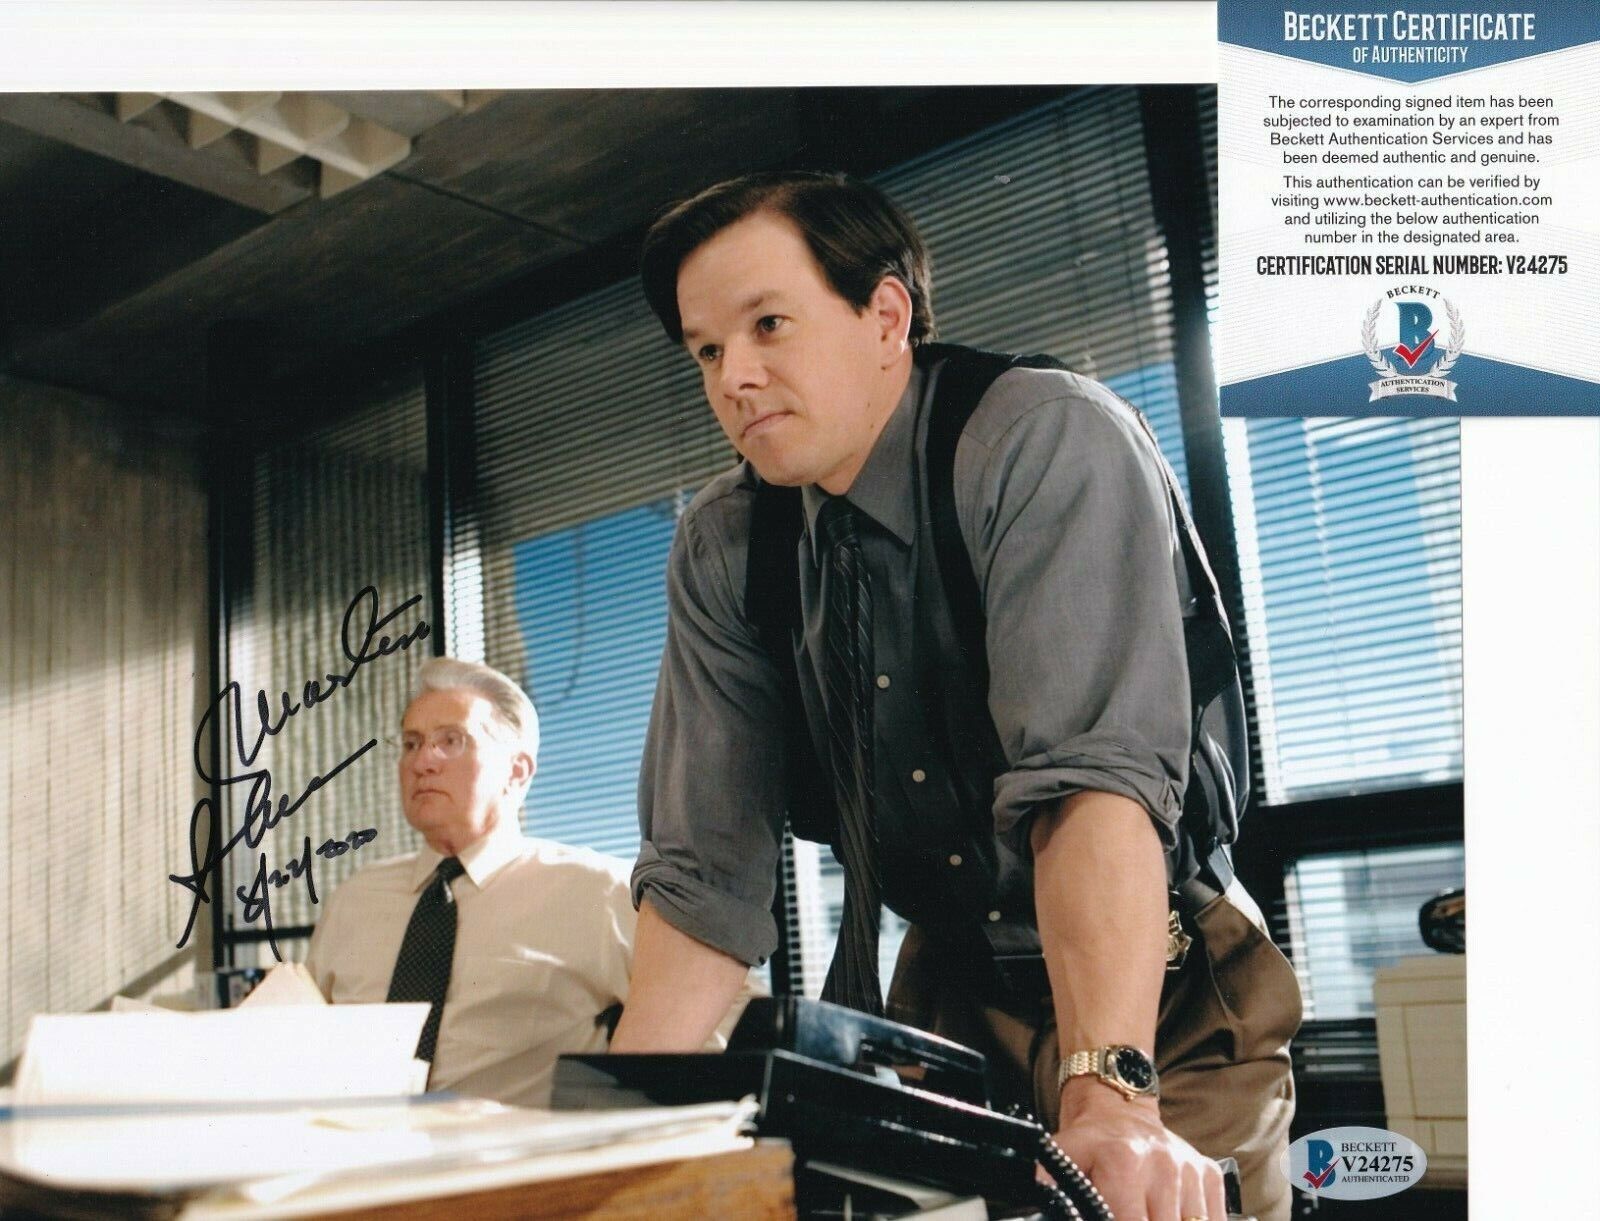 MARTIN SHEEN signed (THE DEPARTED) Movie Queenan 8X10 Photo Poster painting BECKETT BAS V24275